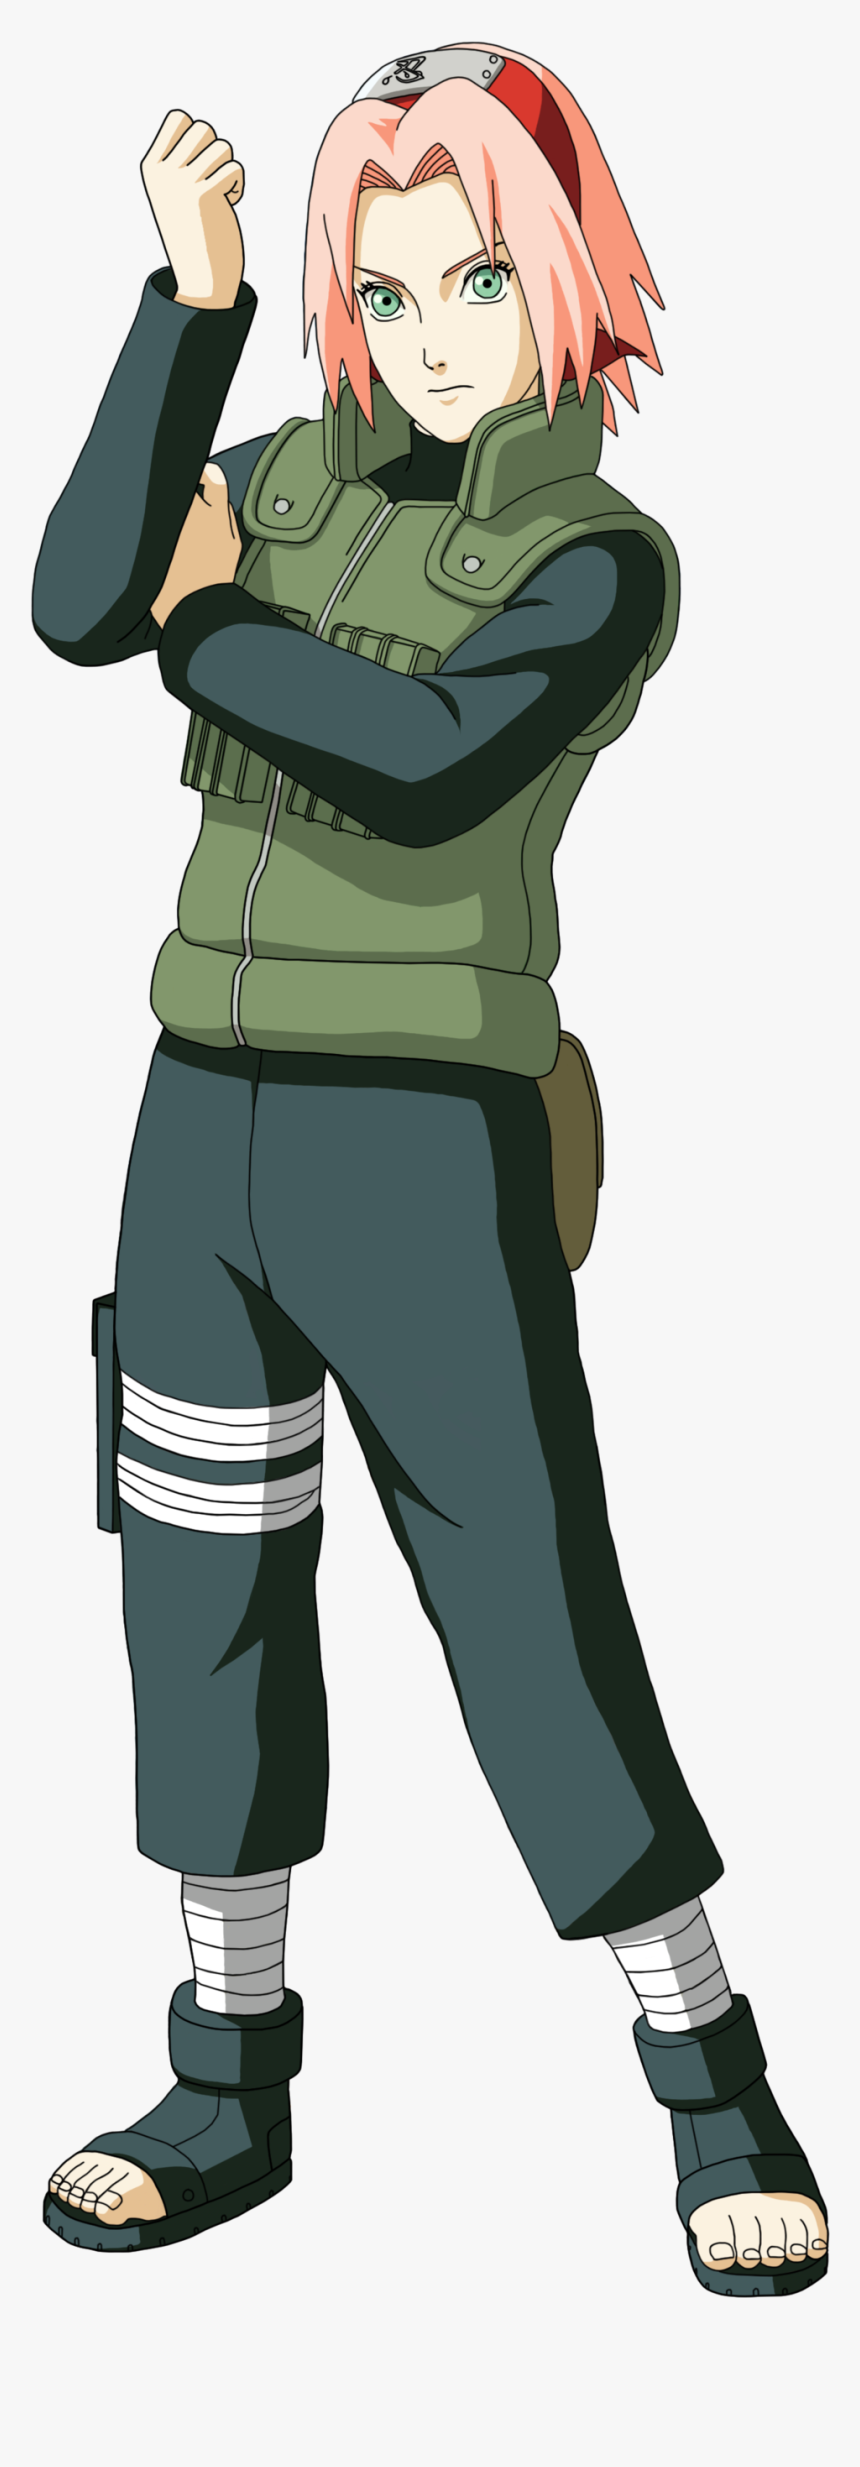 The Only Vest She"s Ever Worn Is The Shinobi Vest, HD Png Download, Free Download